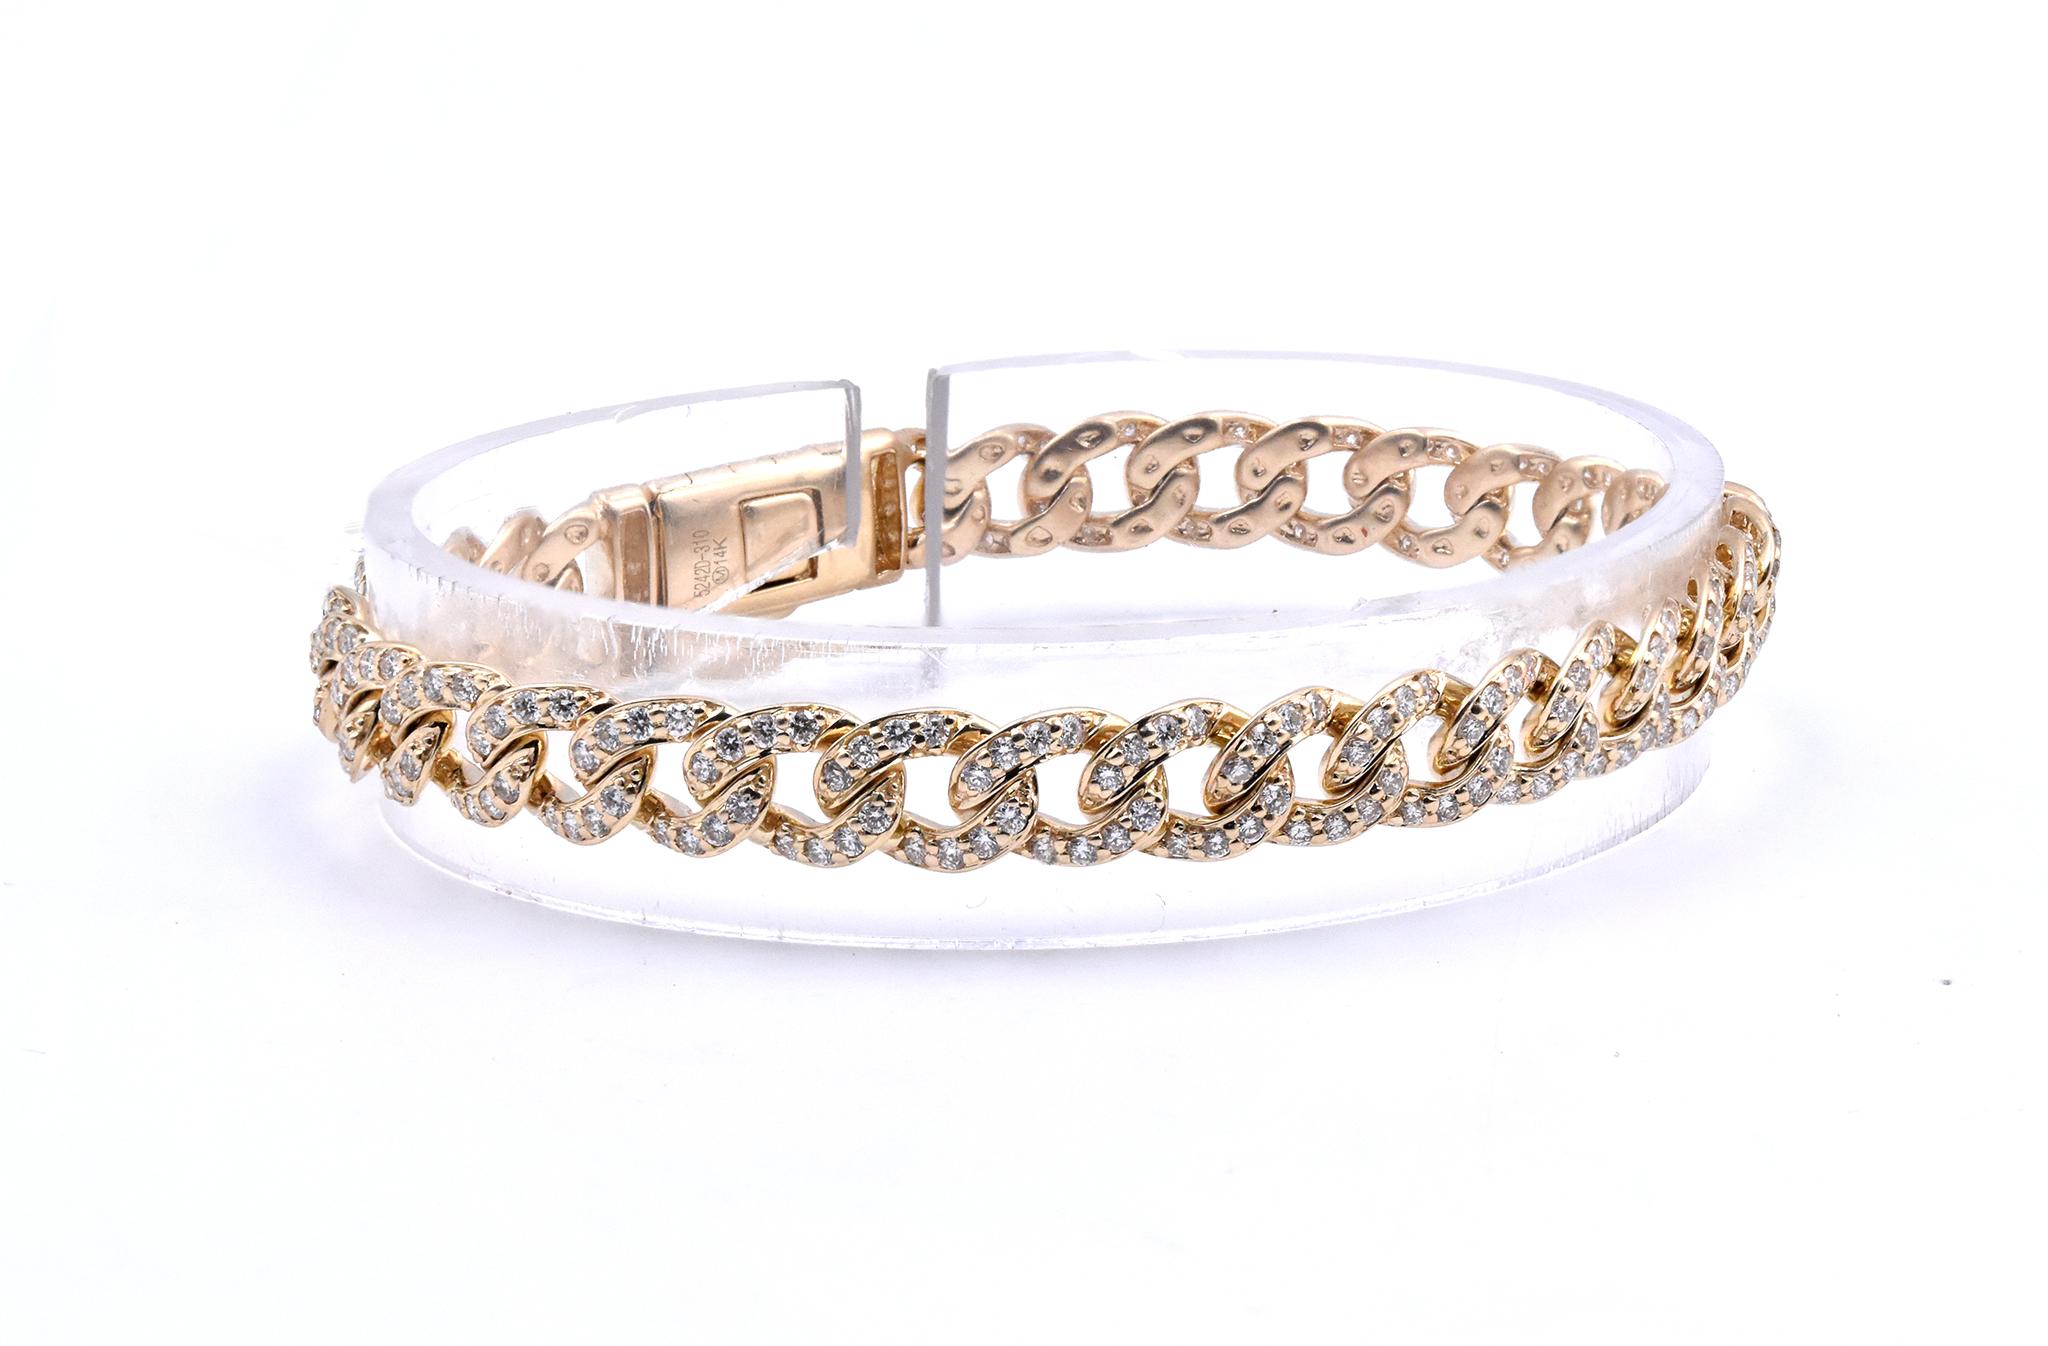 Material: 14K yellow gold
Diamonds: 316 round cut = 2.74cttw
Color: G
Clarity: VS
Dimensions: bracelet will fit up to a 7.5-inch wrist
Weight: 15.99 grams
